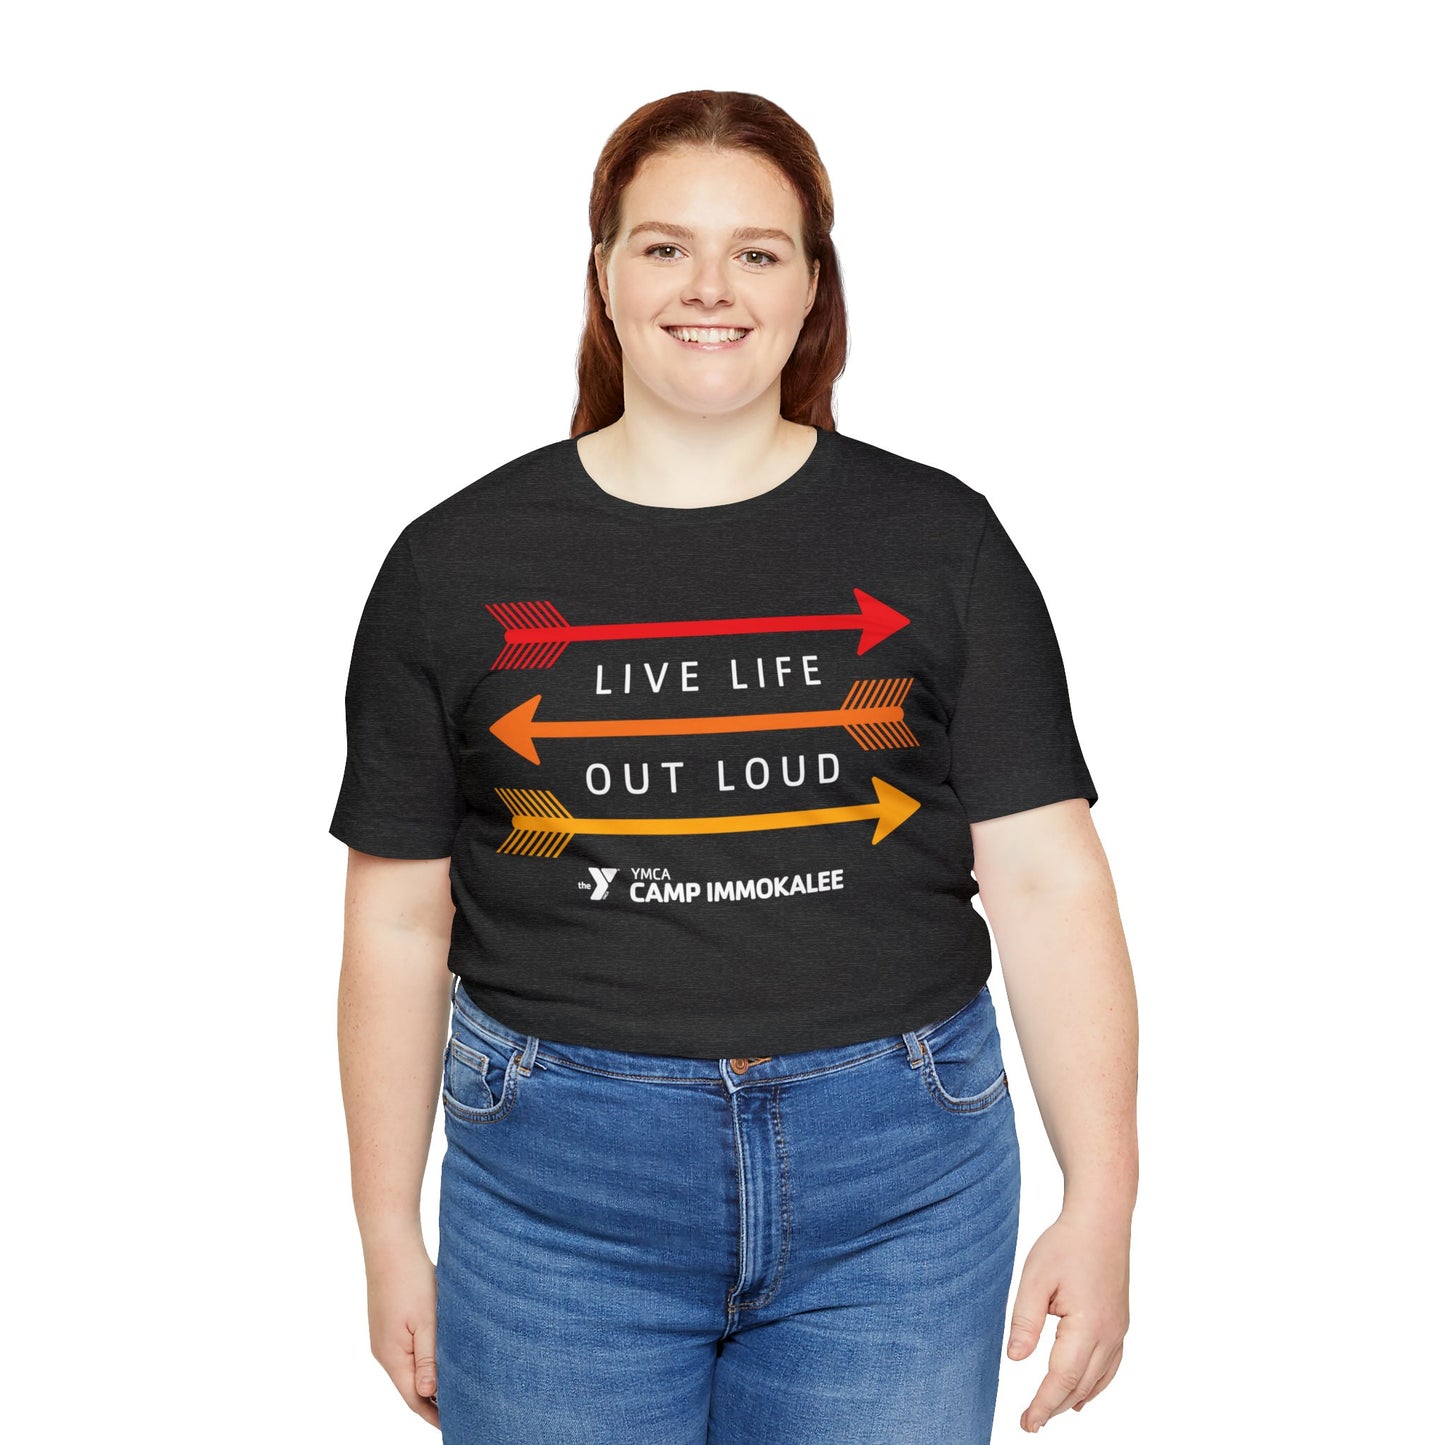 Camp Immokalee Live Life Out Loud Unisex Jersey Short Sleeve Tee